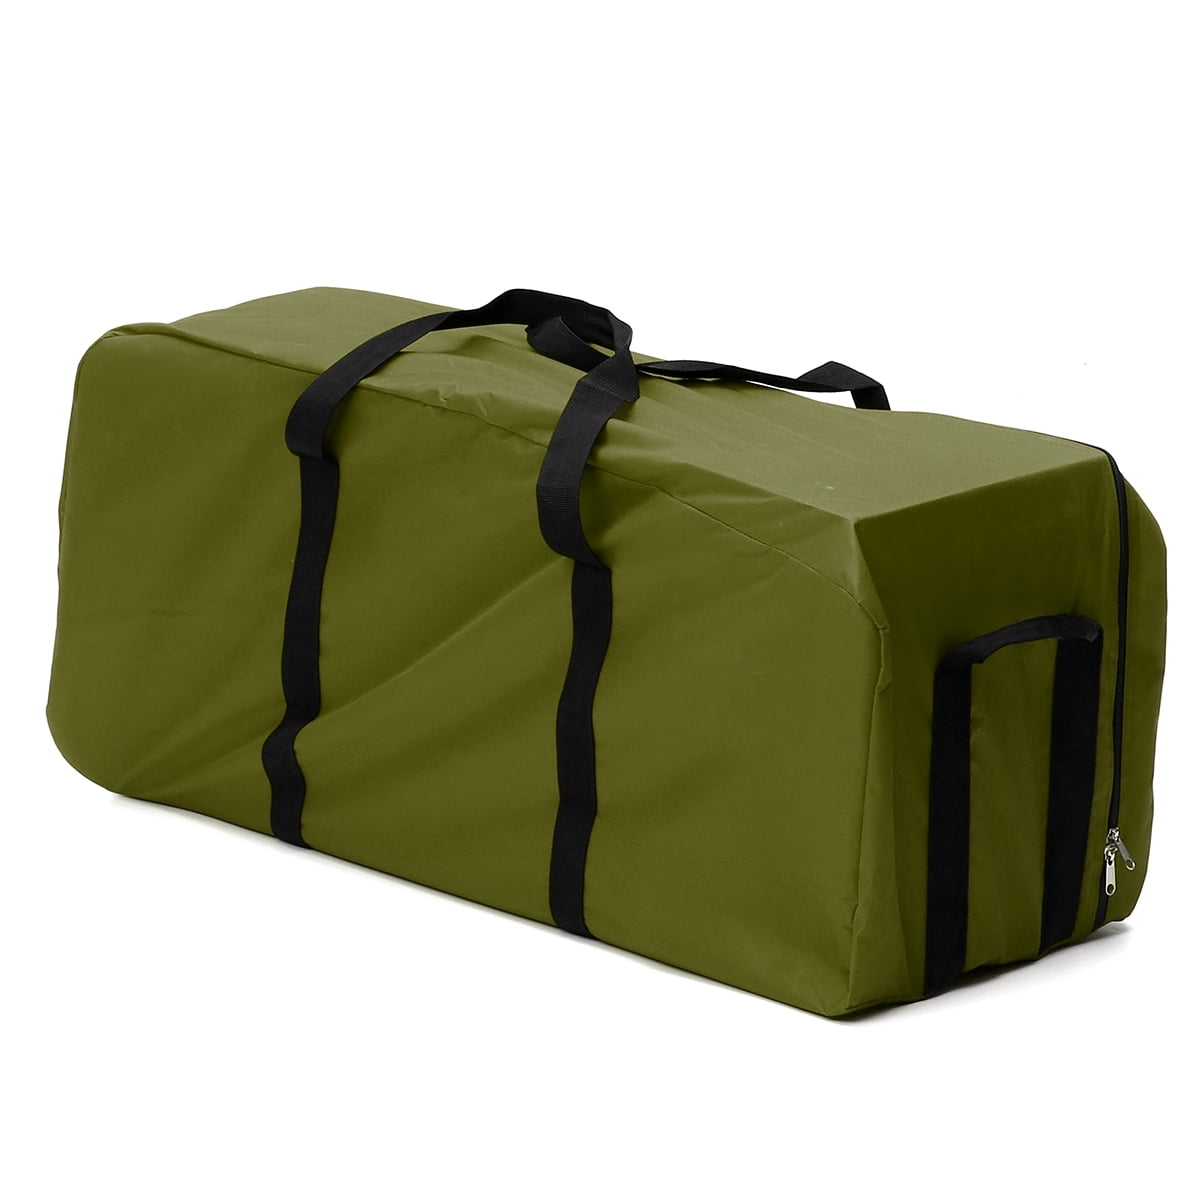 Packable Travel Duffle Bag Foldable Duffel Bags Large Oxford Bag for Luggage Gym Sports Camping ...